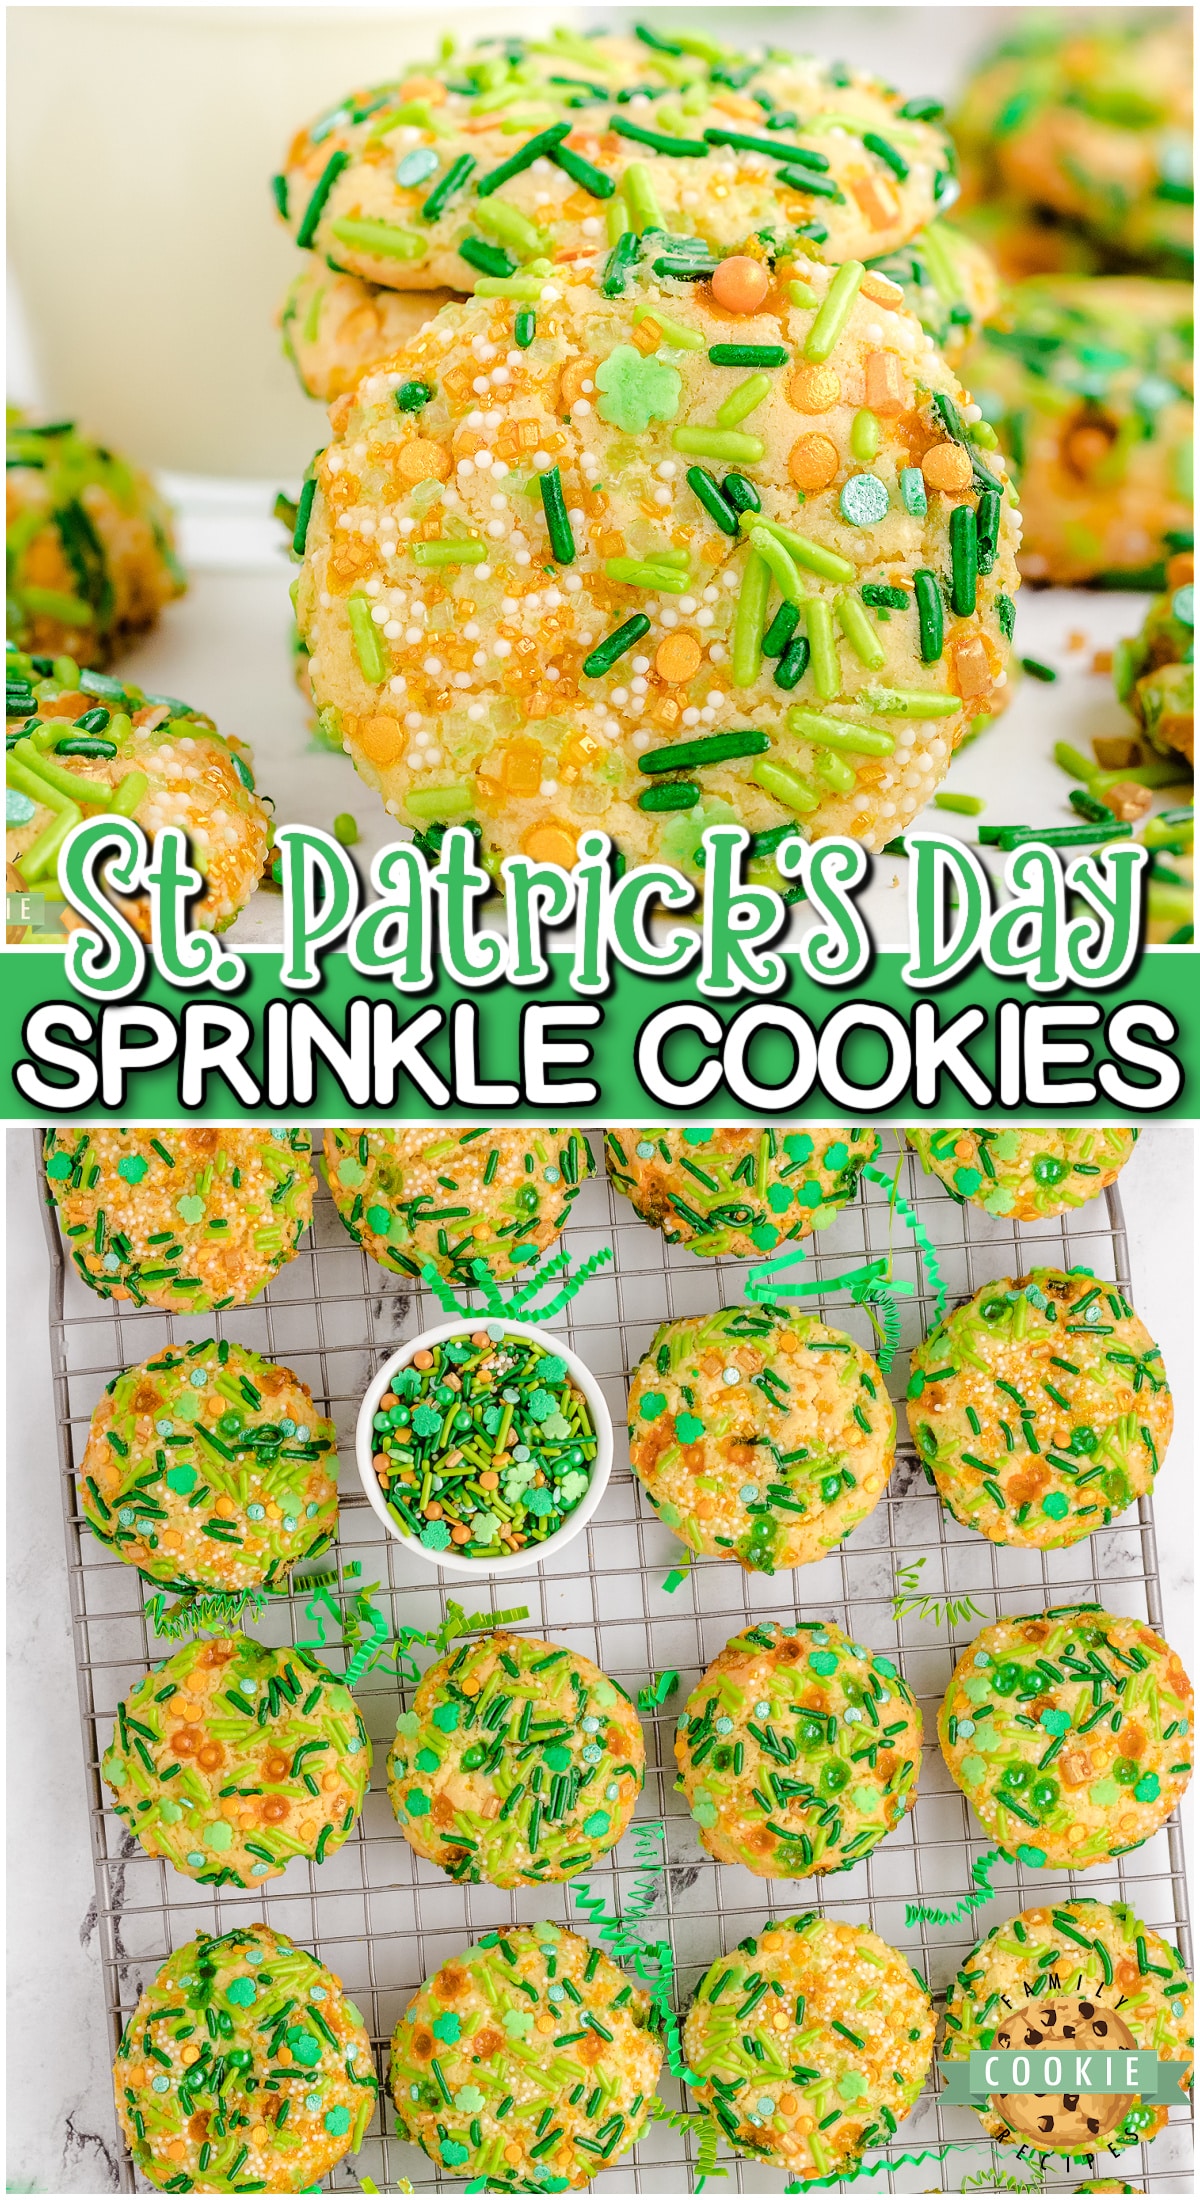 Soft & chewy St. Patrick's Day Sprinkle Cookies made fun & festive with plenty of green! Vanilla pudding cookies rolled in colorful sprinkles, perfect for parties!